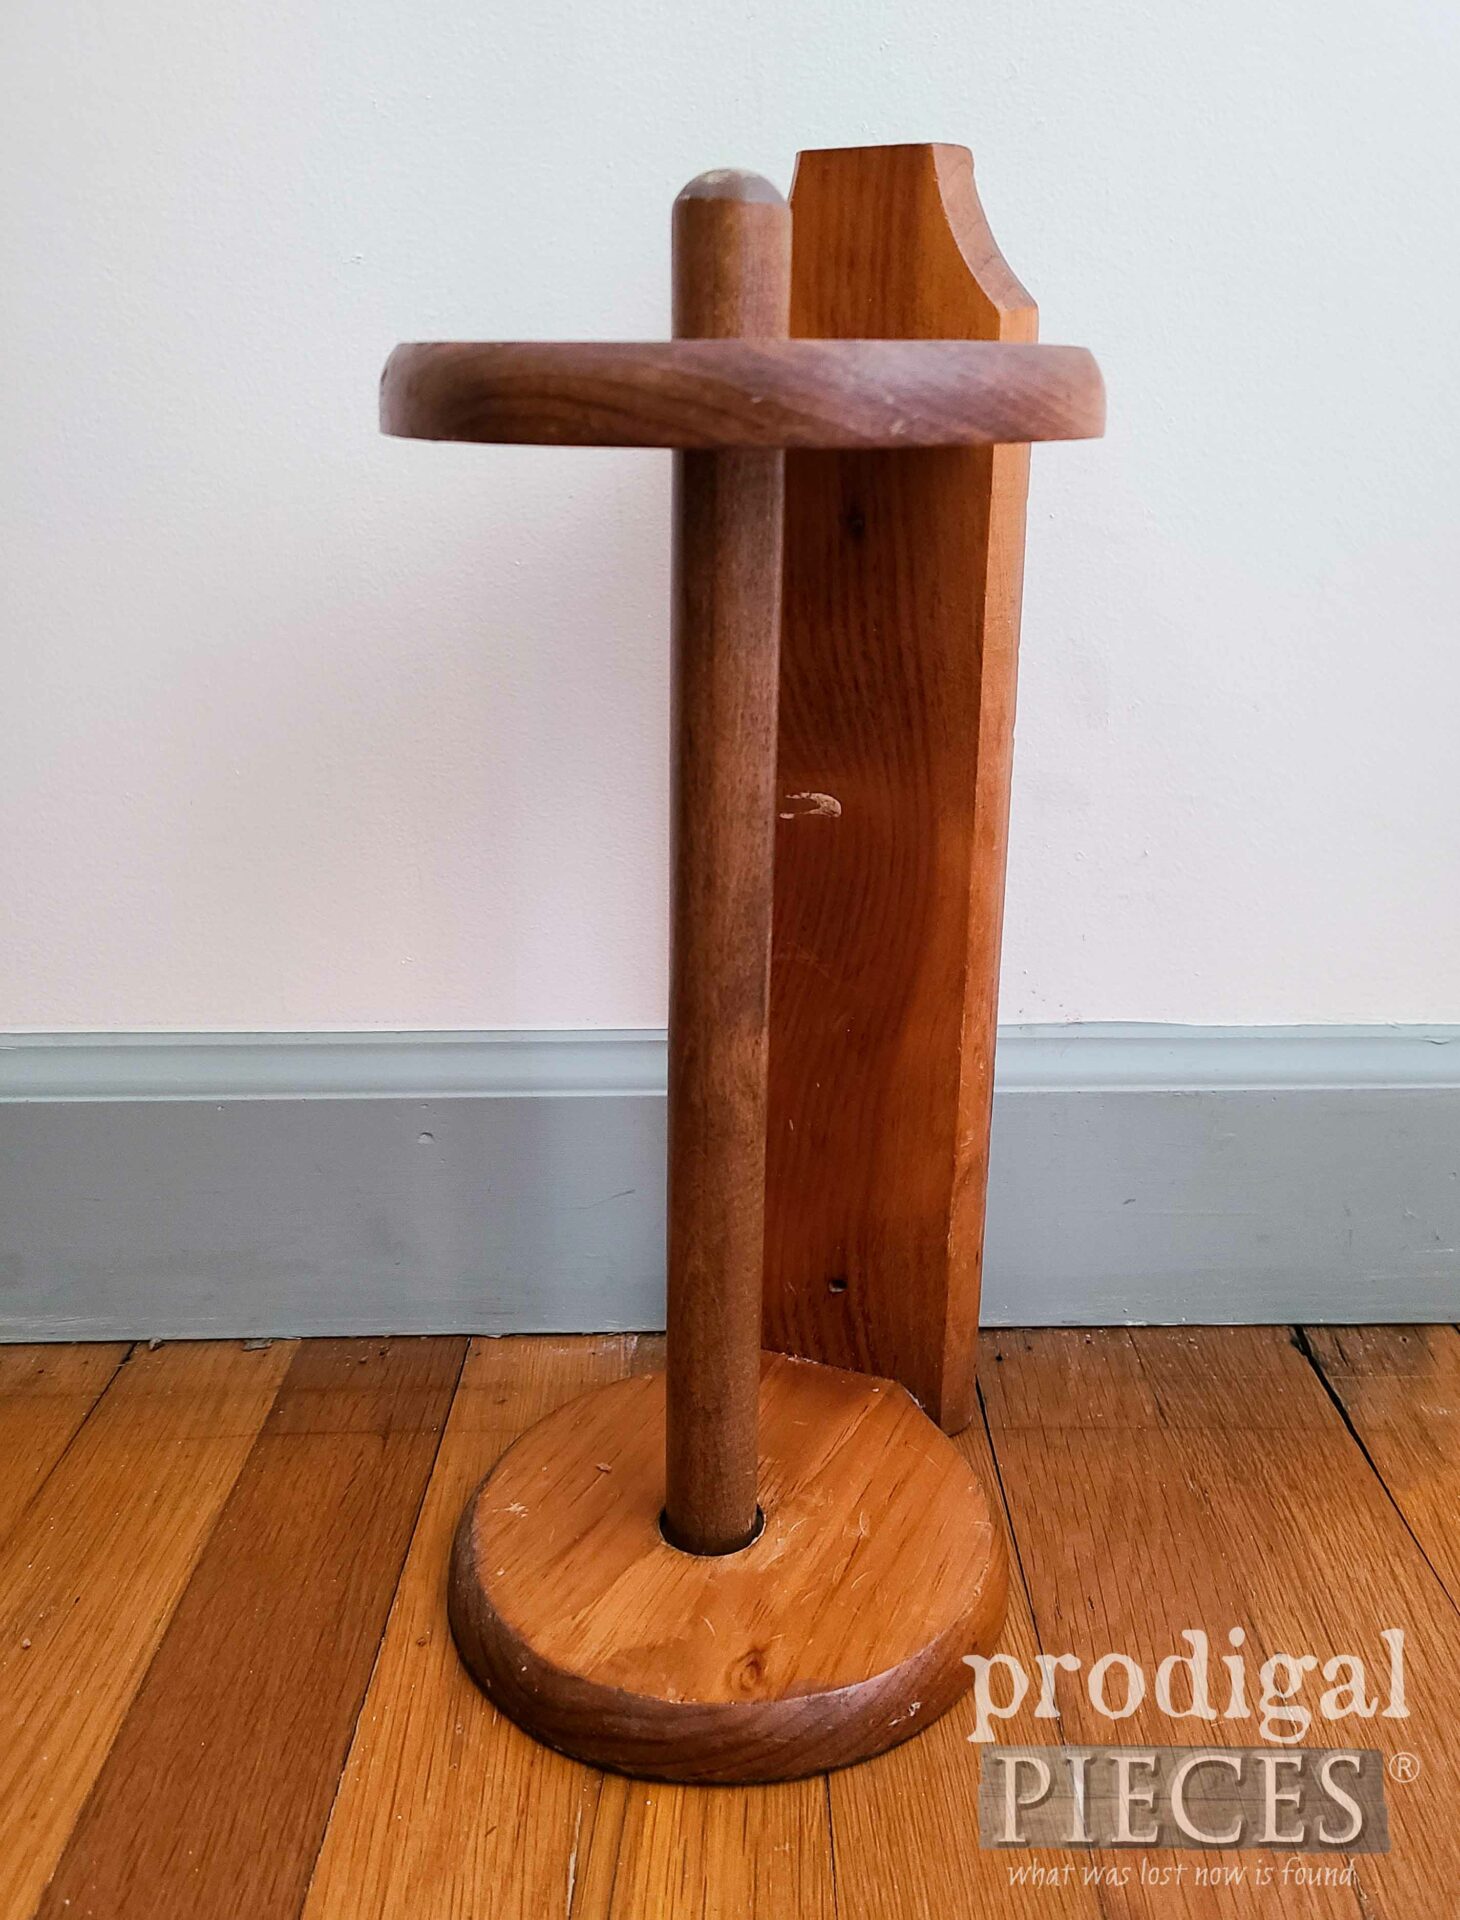 Vintage Paper Towel Holder Before Upcycle | prodigalpieces.com #prodigalpieces